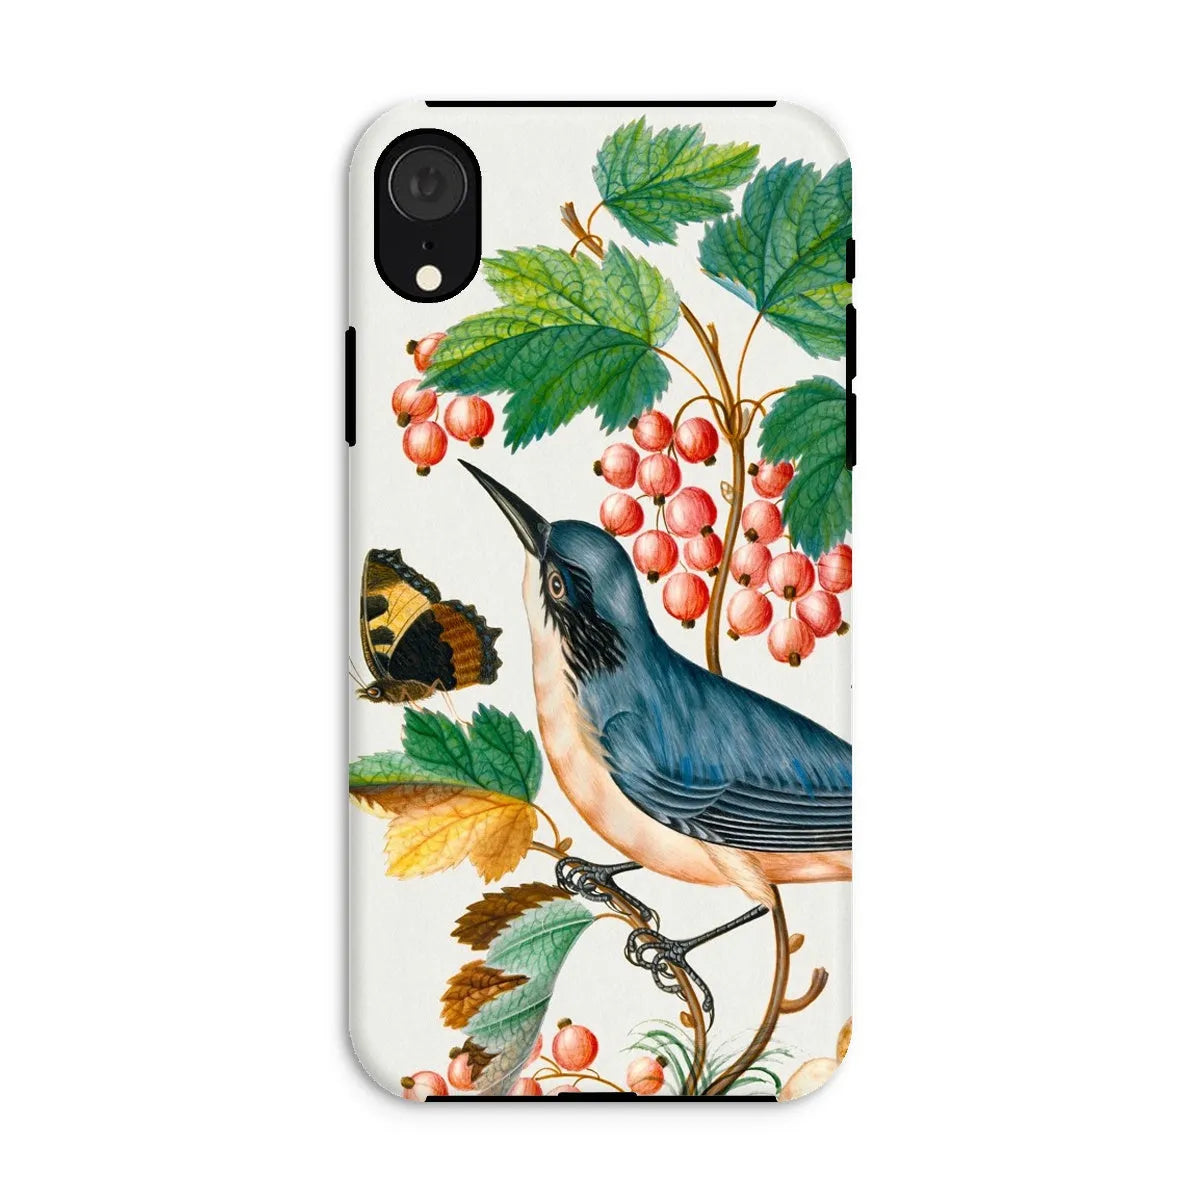 Warbler Admiral Wasps & Ants - Art Phone Case - James Bolton - Iphone Xr / Matte - Mobile Phone Cases - Aesthetic Art